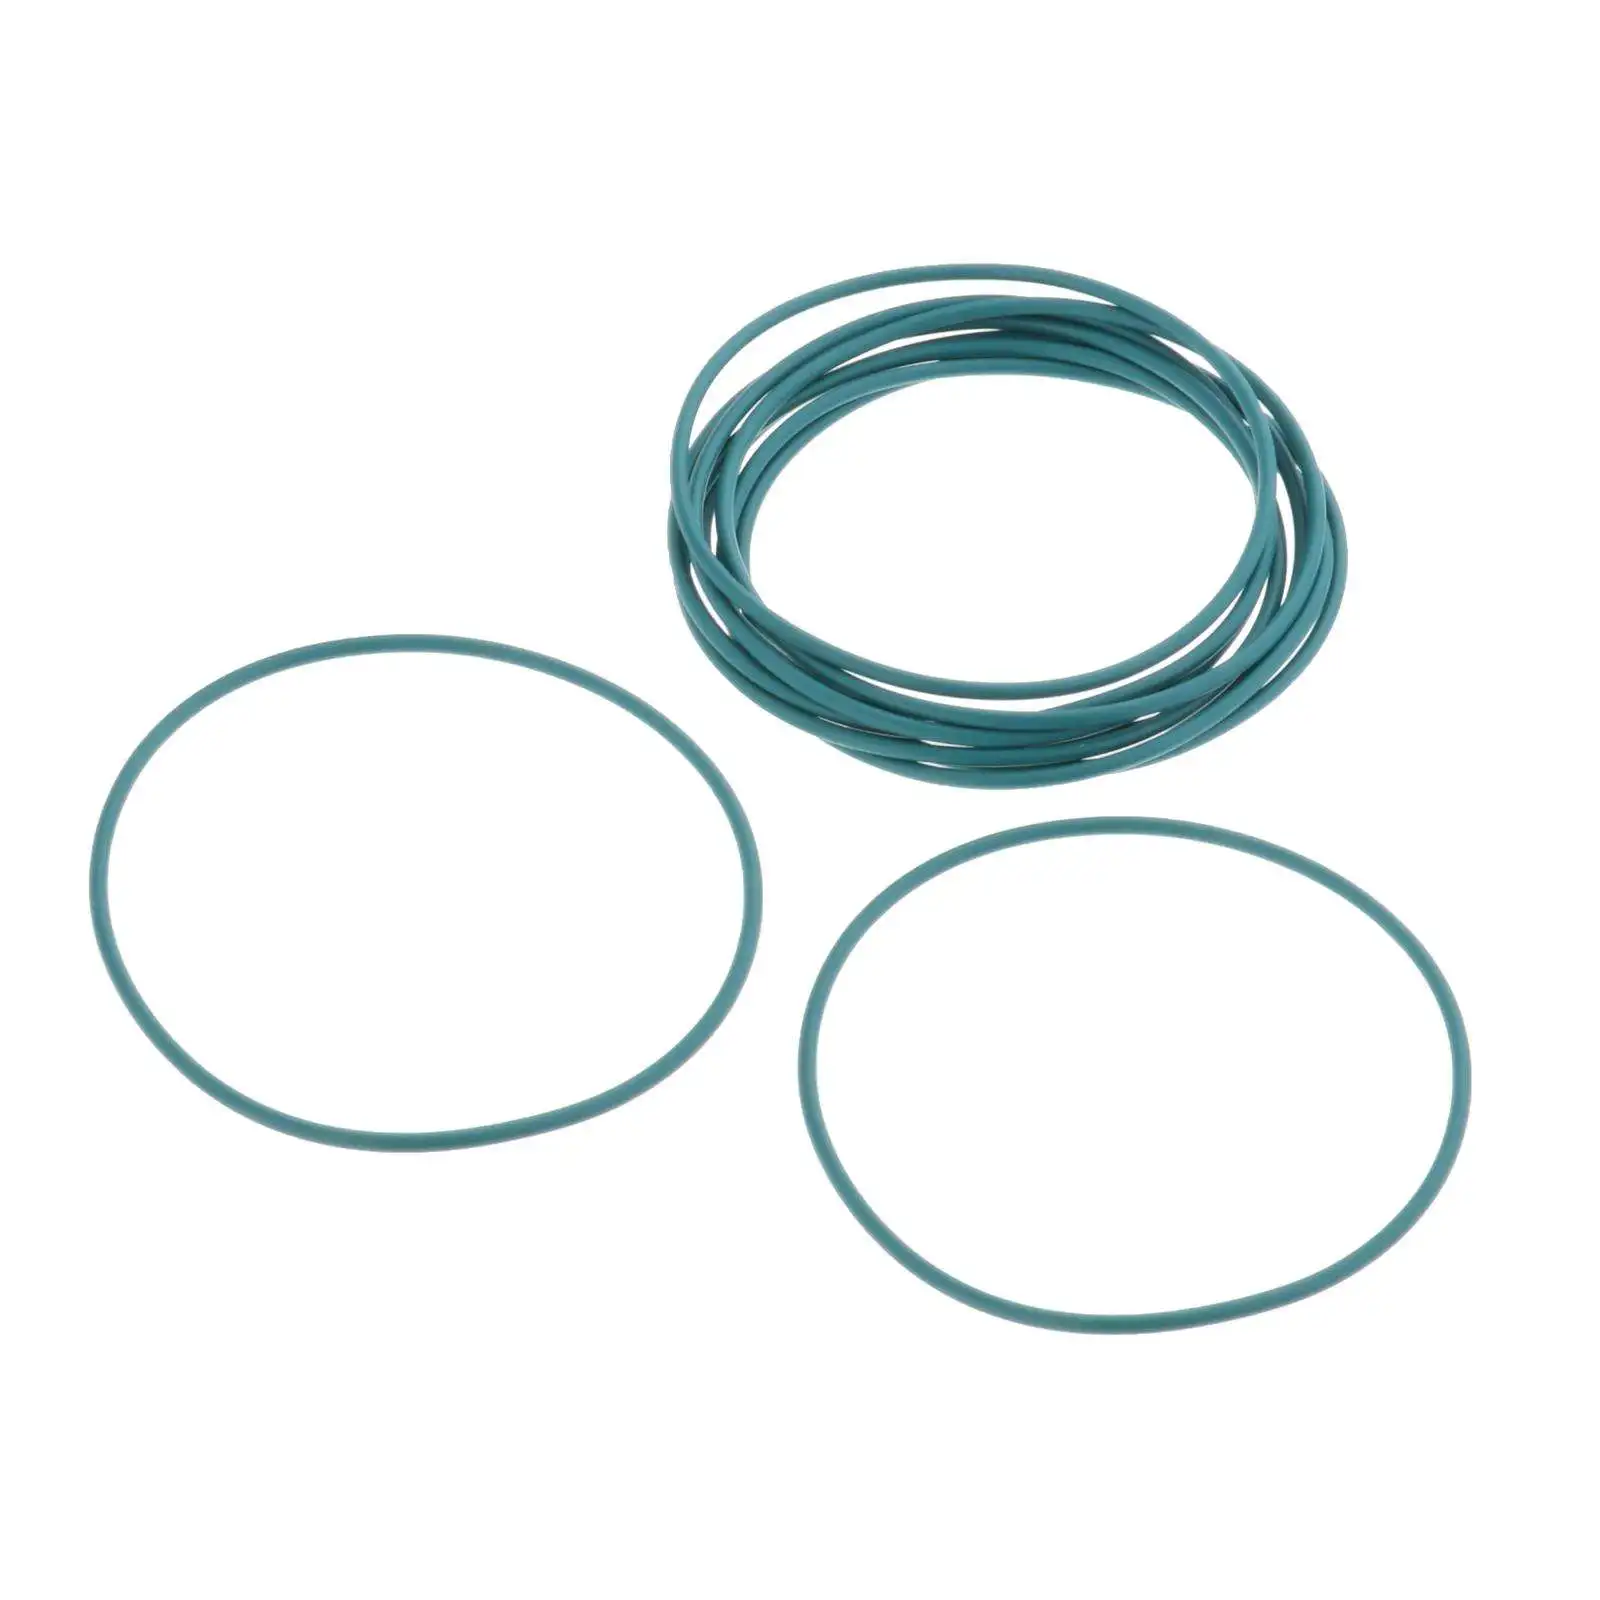 Accumulator Seal Rings 0AM Replacement DQ200 Fit for SCIROCCO for Bora Car Drivetrain Vehicle